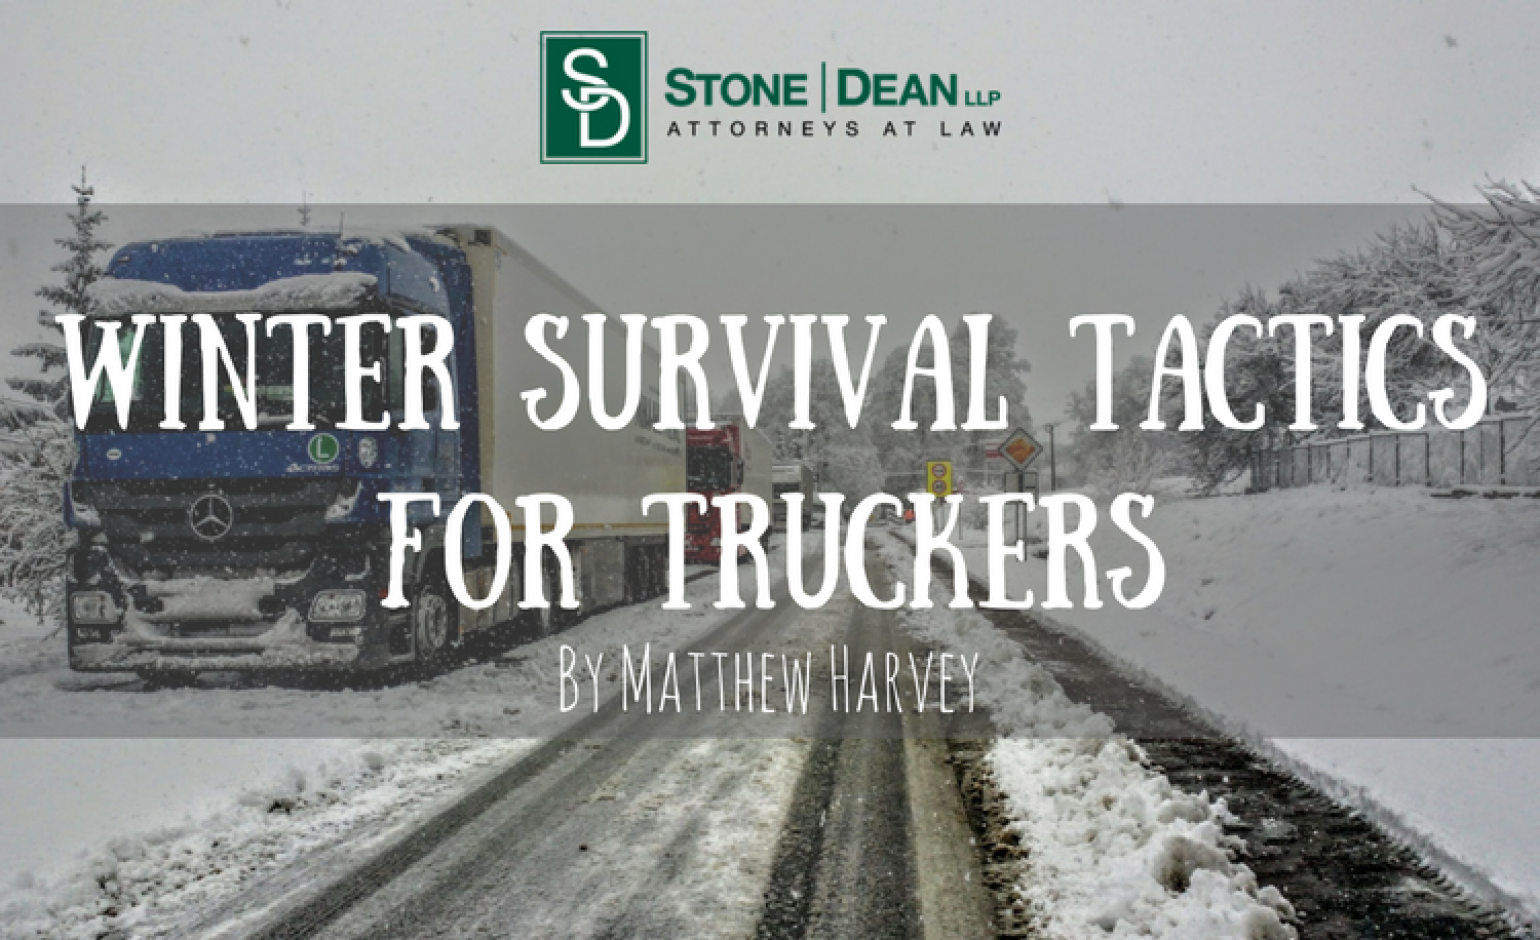 Truckers hauling essentials and weathering storms